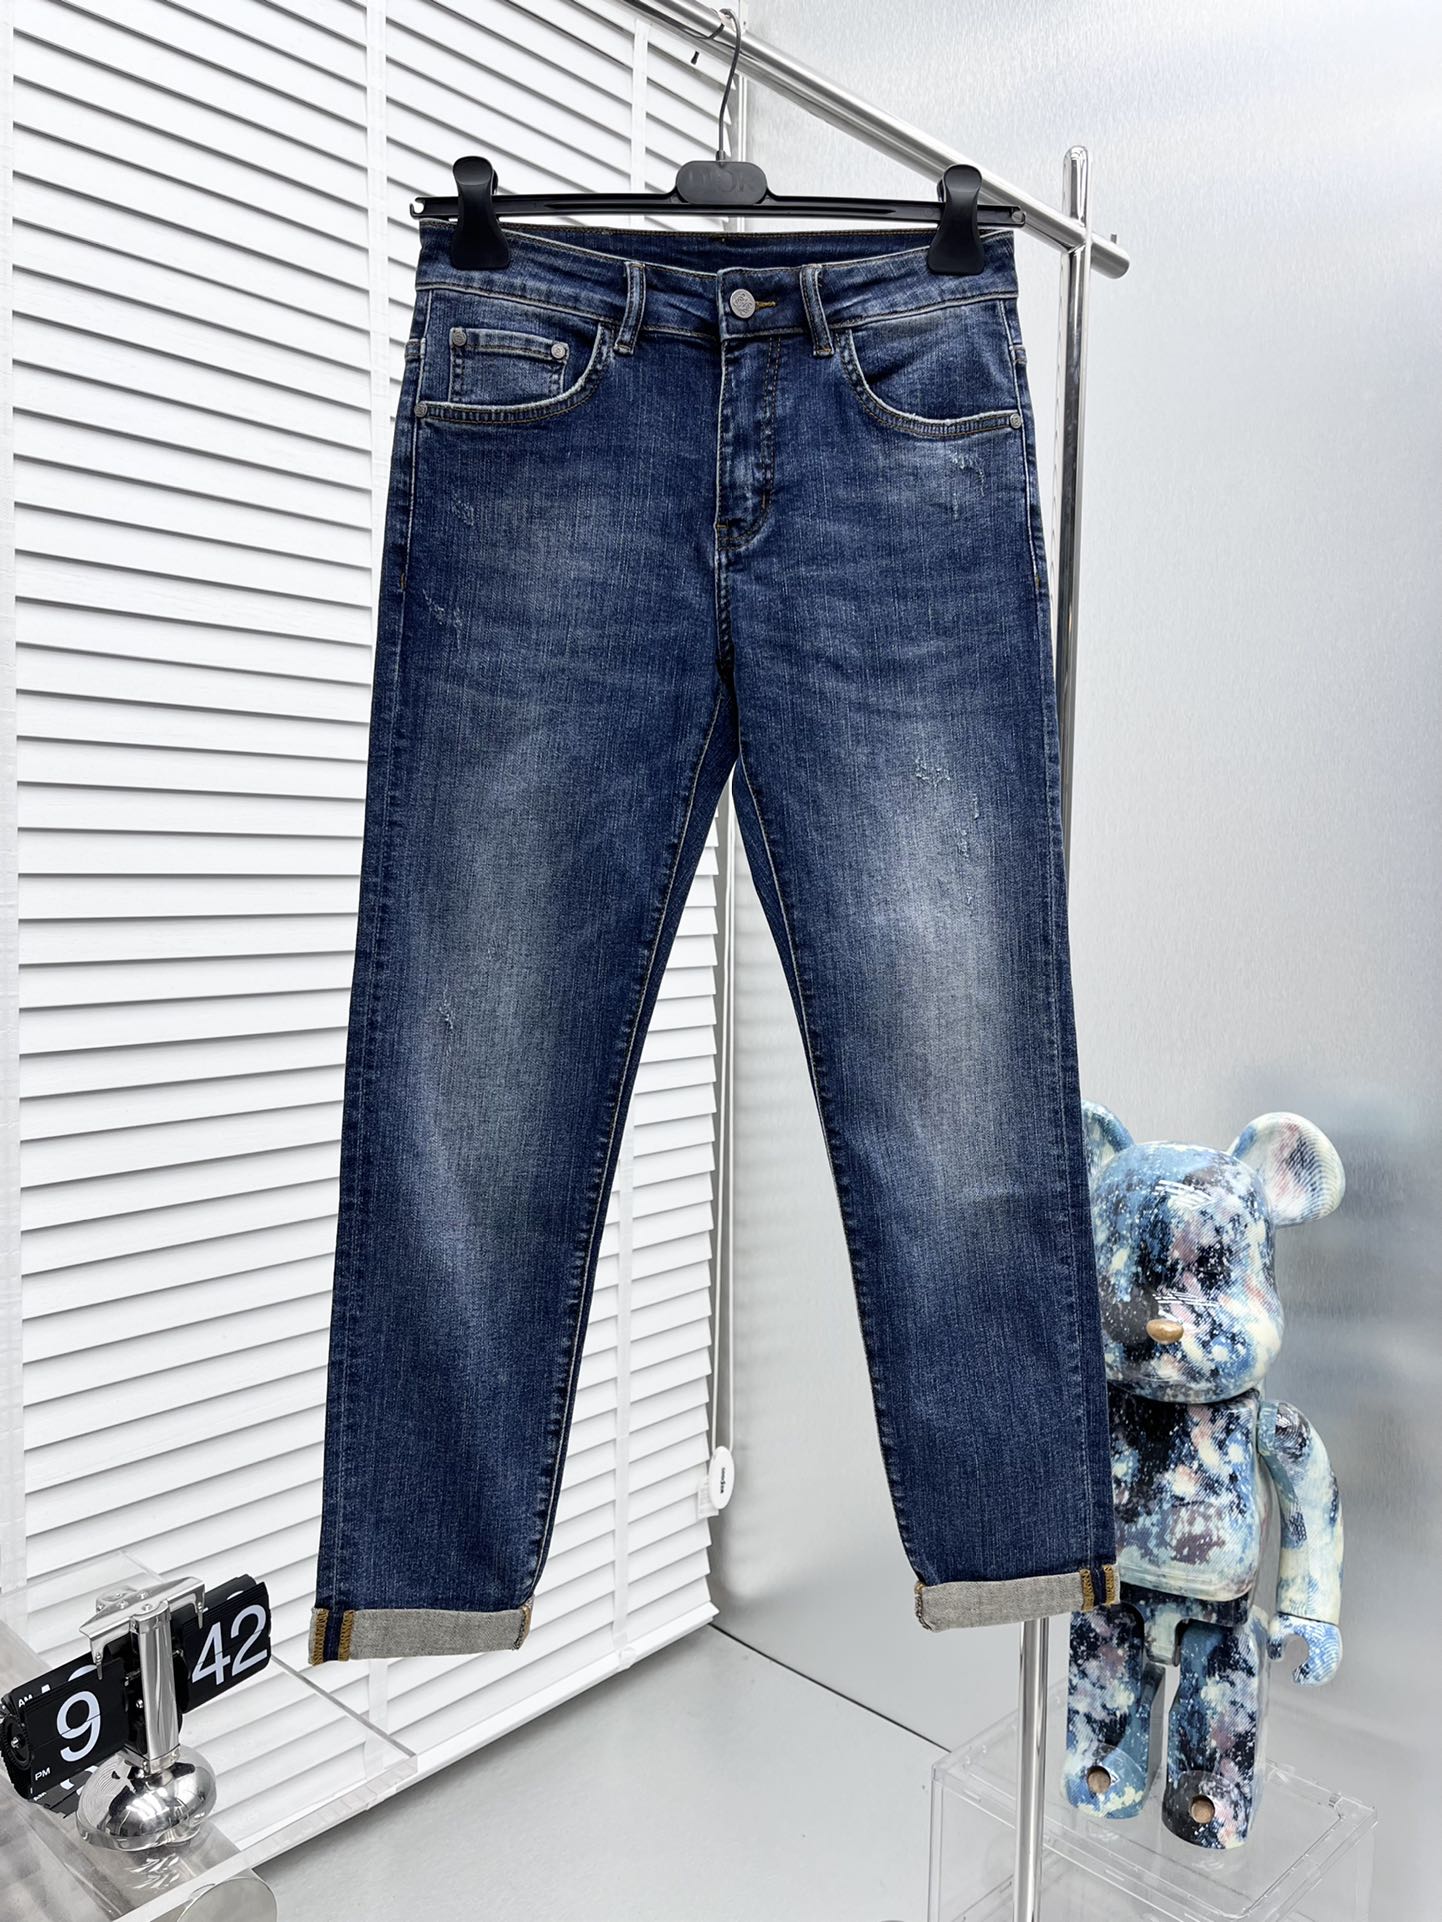 Online From China
 Loewe Clothing Jeans Fall/Winter Collection Casual